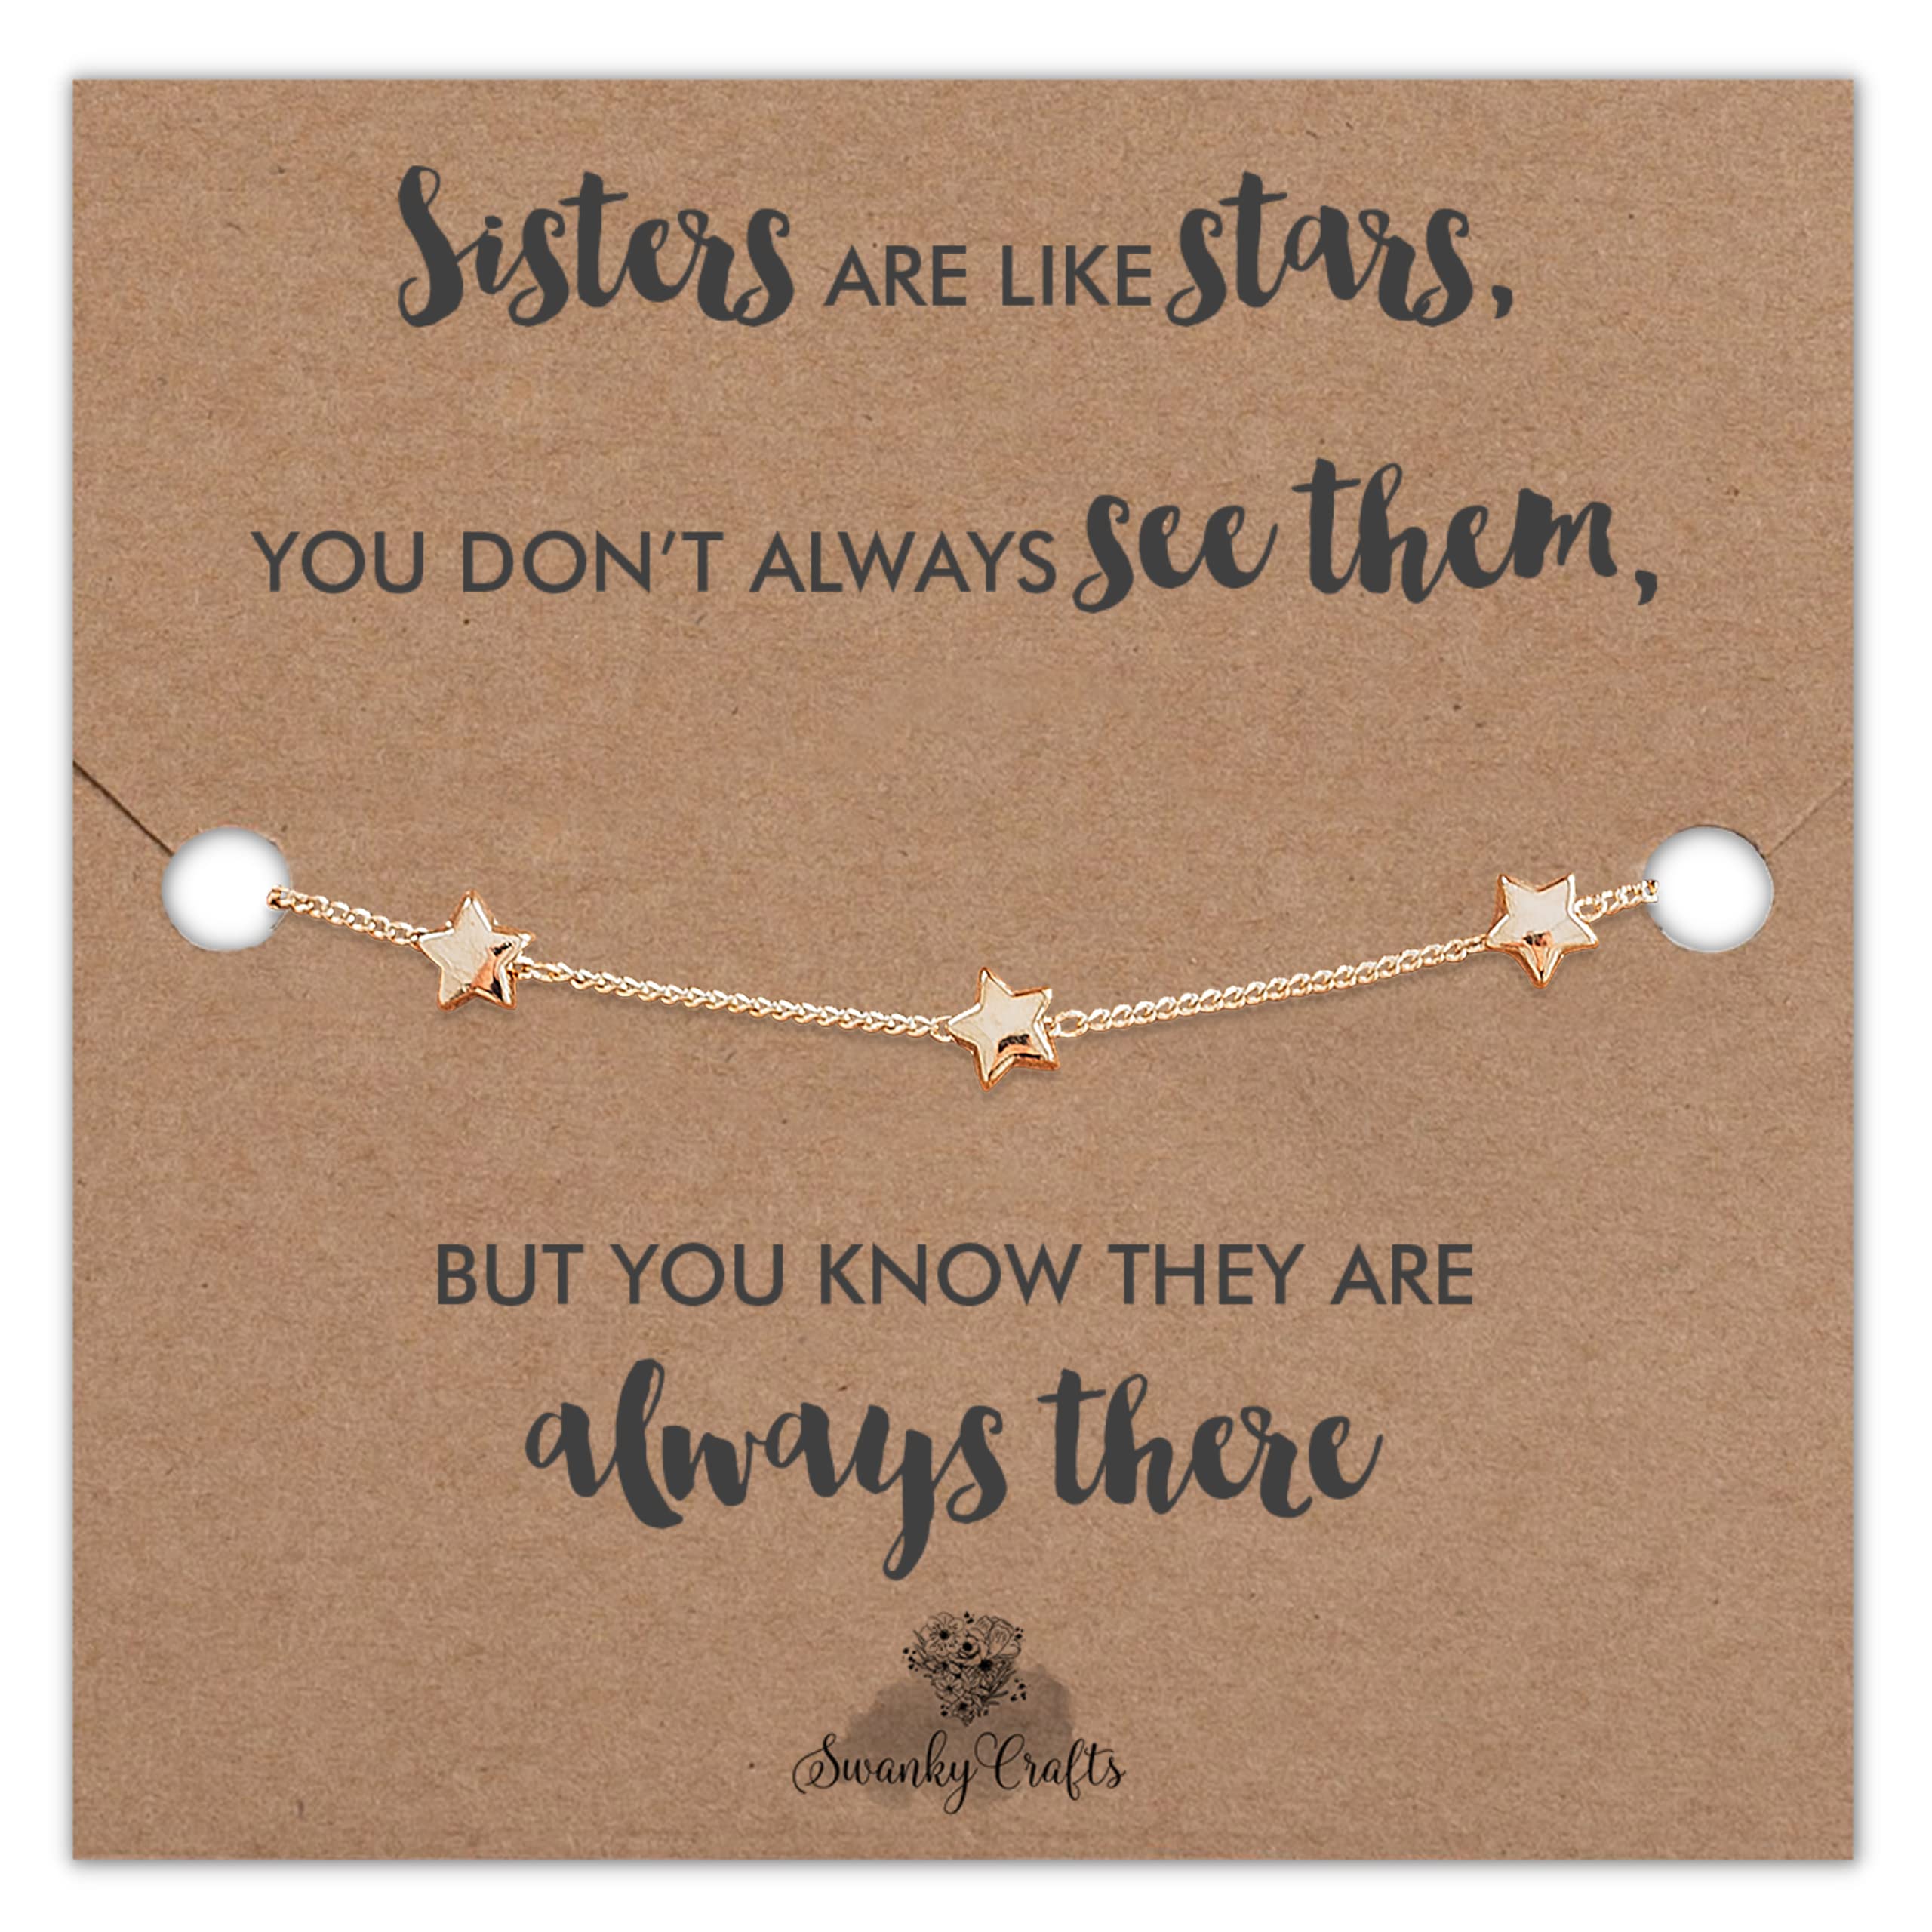 Sisters Gifts from Sister bracelets - Presents for sister Gift for Sister Birthday Gifts from Sister gifts from sisters gifts for sister from brother and sister gifts Gift for Sisters from sister - Golden Star sister Bracelet with Cute Card